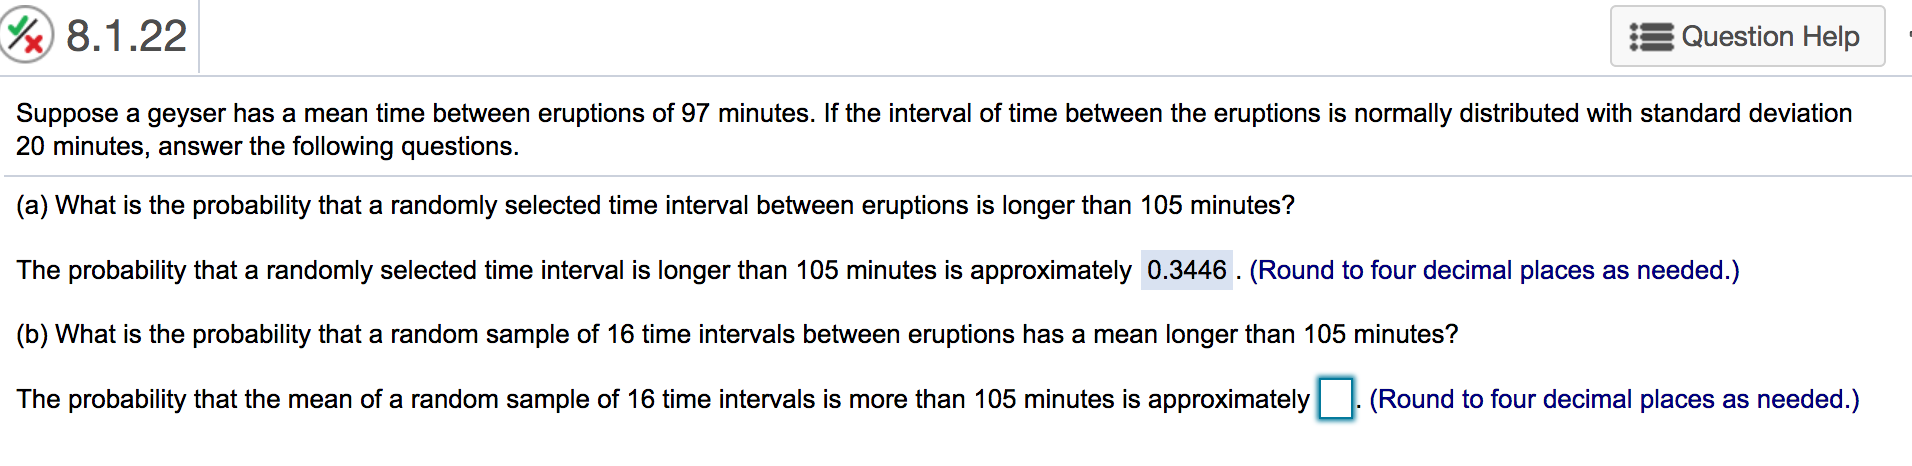 8.1.22
Question Help
Suppose a geyser has a mean time between eruptions of 97 minutes. If the interval of time between the eruptions is normally distributed with standard deviation
20 minutes, answer the following questions.
(a) What is the probability that a randomly selected time interval between eruptions is longer than 105 minutes?
The probability that a randomly selected time interval is longer than 105 minutes is approximately 0.3446. (Round to four decimal places as needed.)
(b) What is the probability that a random sample of 16 time intervals between eruptions has a mean longer than 105 minutes?
(Round to four decimal places as needed.)
The probability that the mean of a random sample of 16 time intervals is more than 105 minutes is approximately
